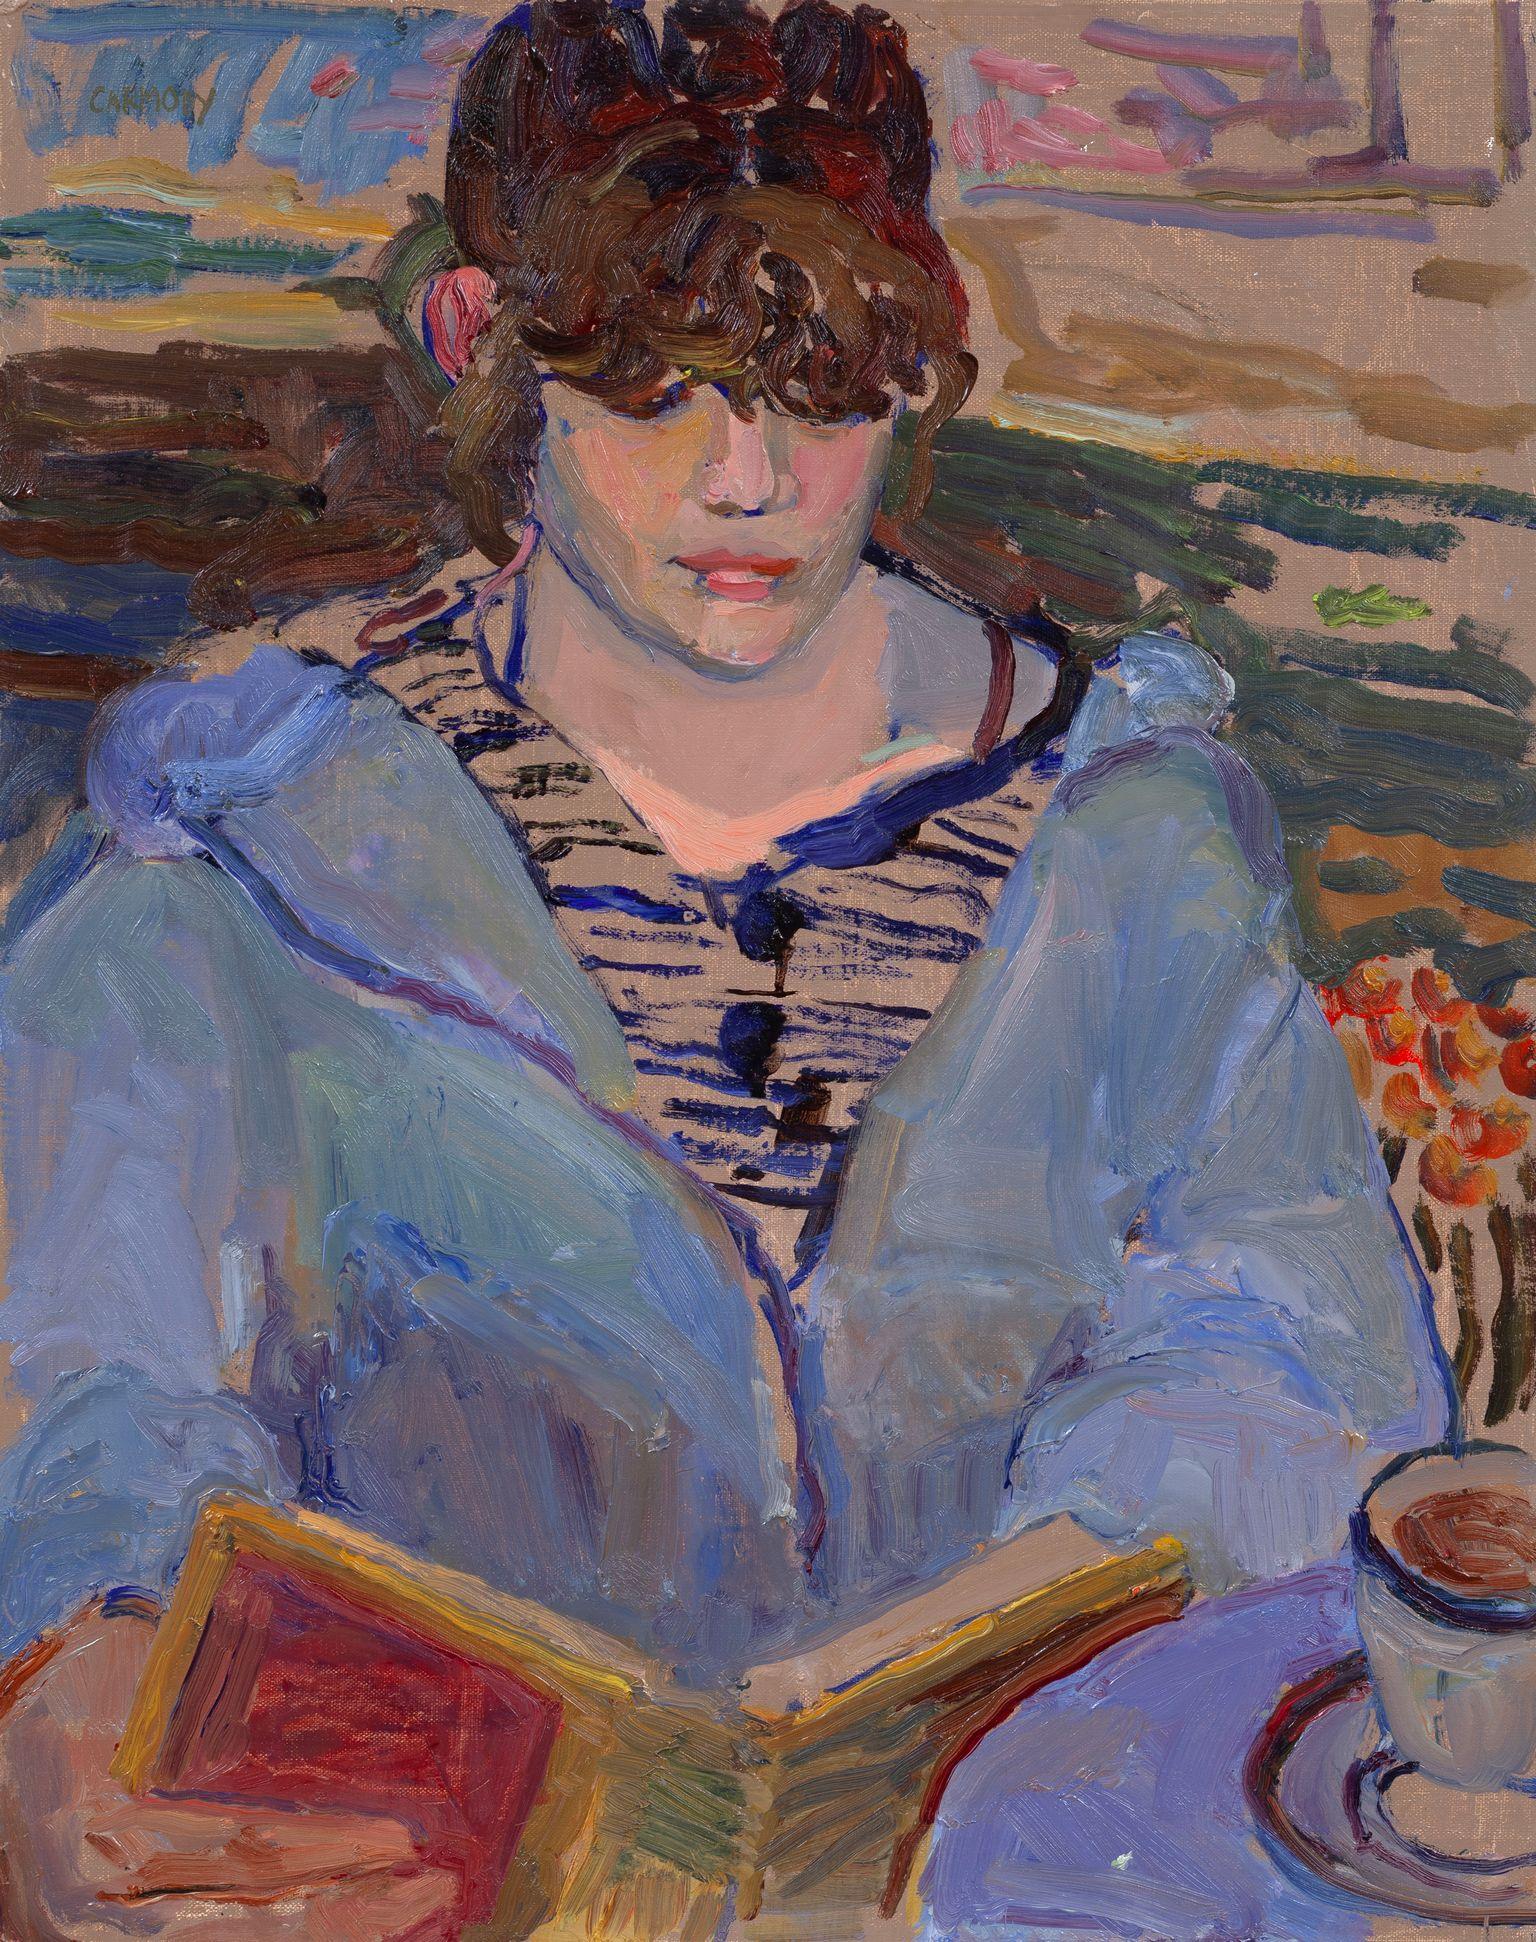 Kelly Carmody Portrait Painting - "Reading" contemporary oil painting of woman with book, painterly stylized